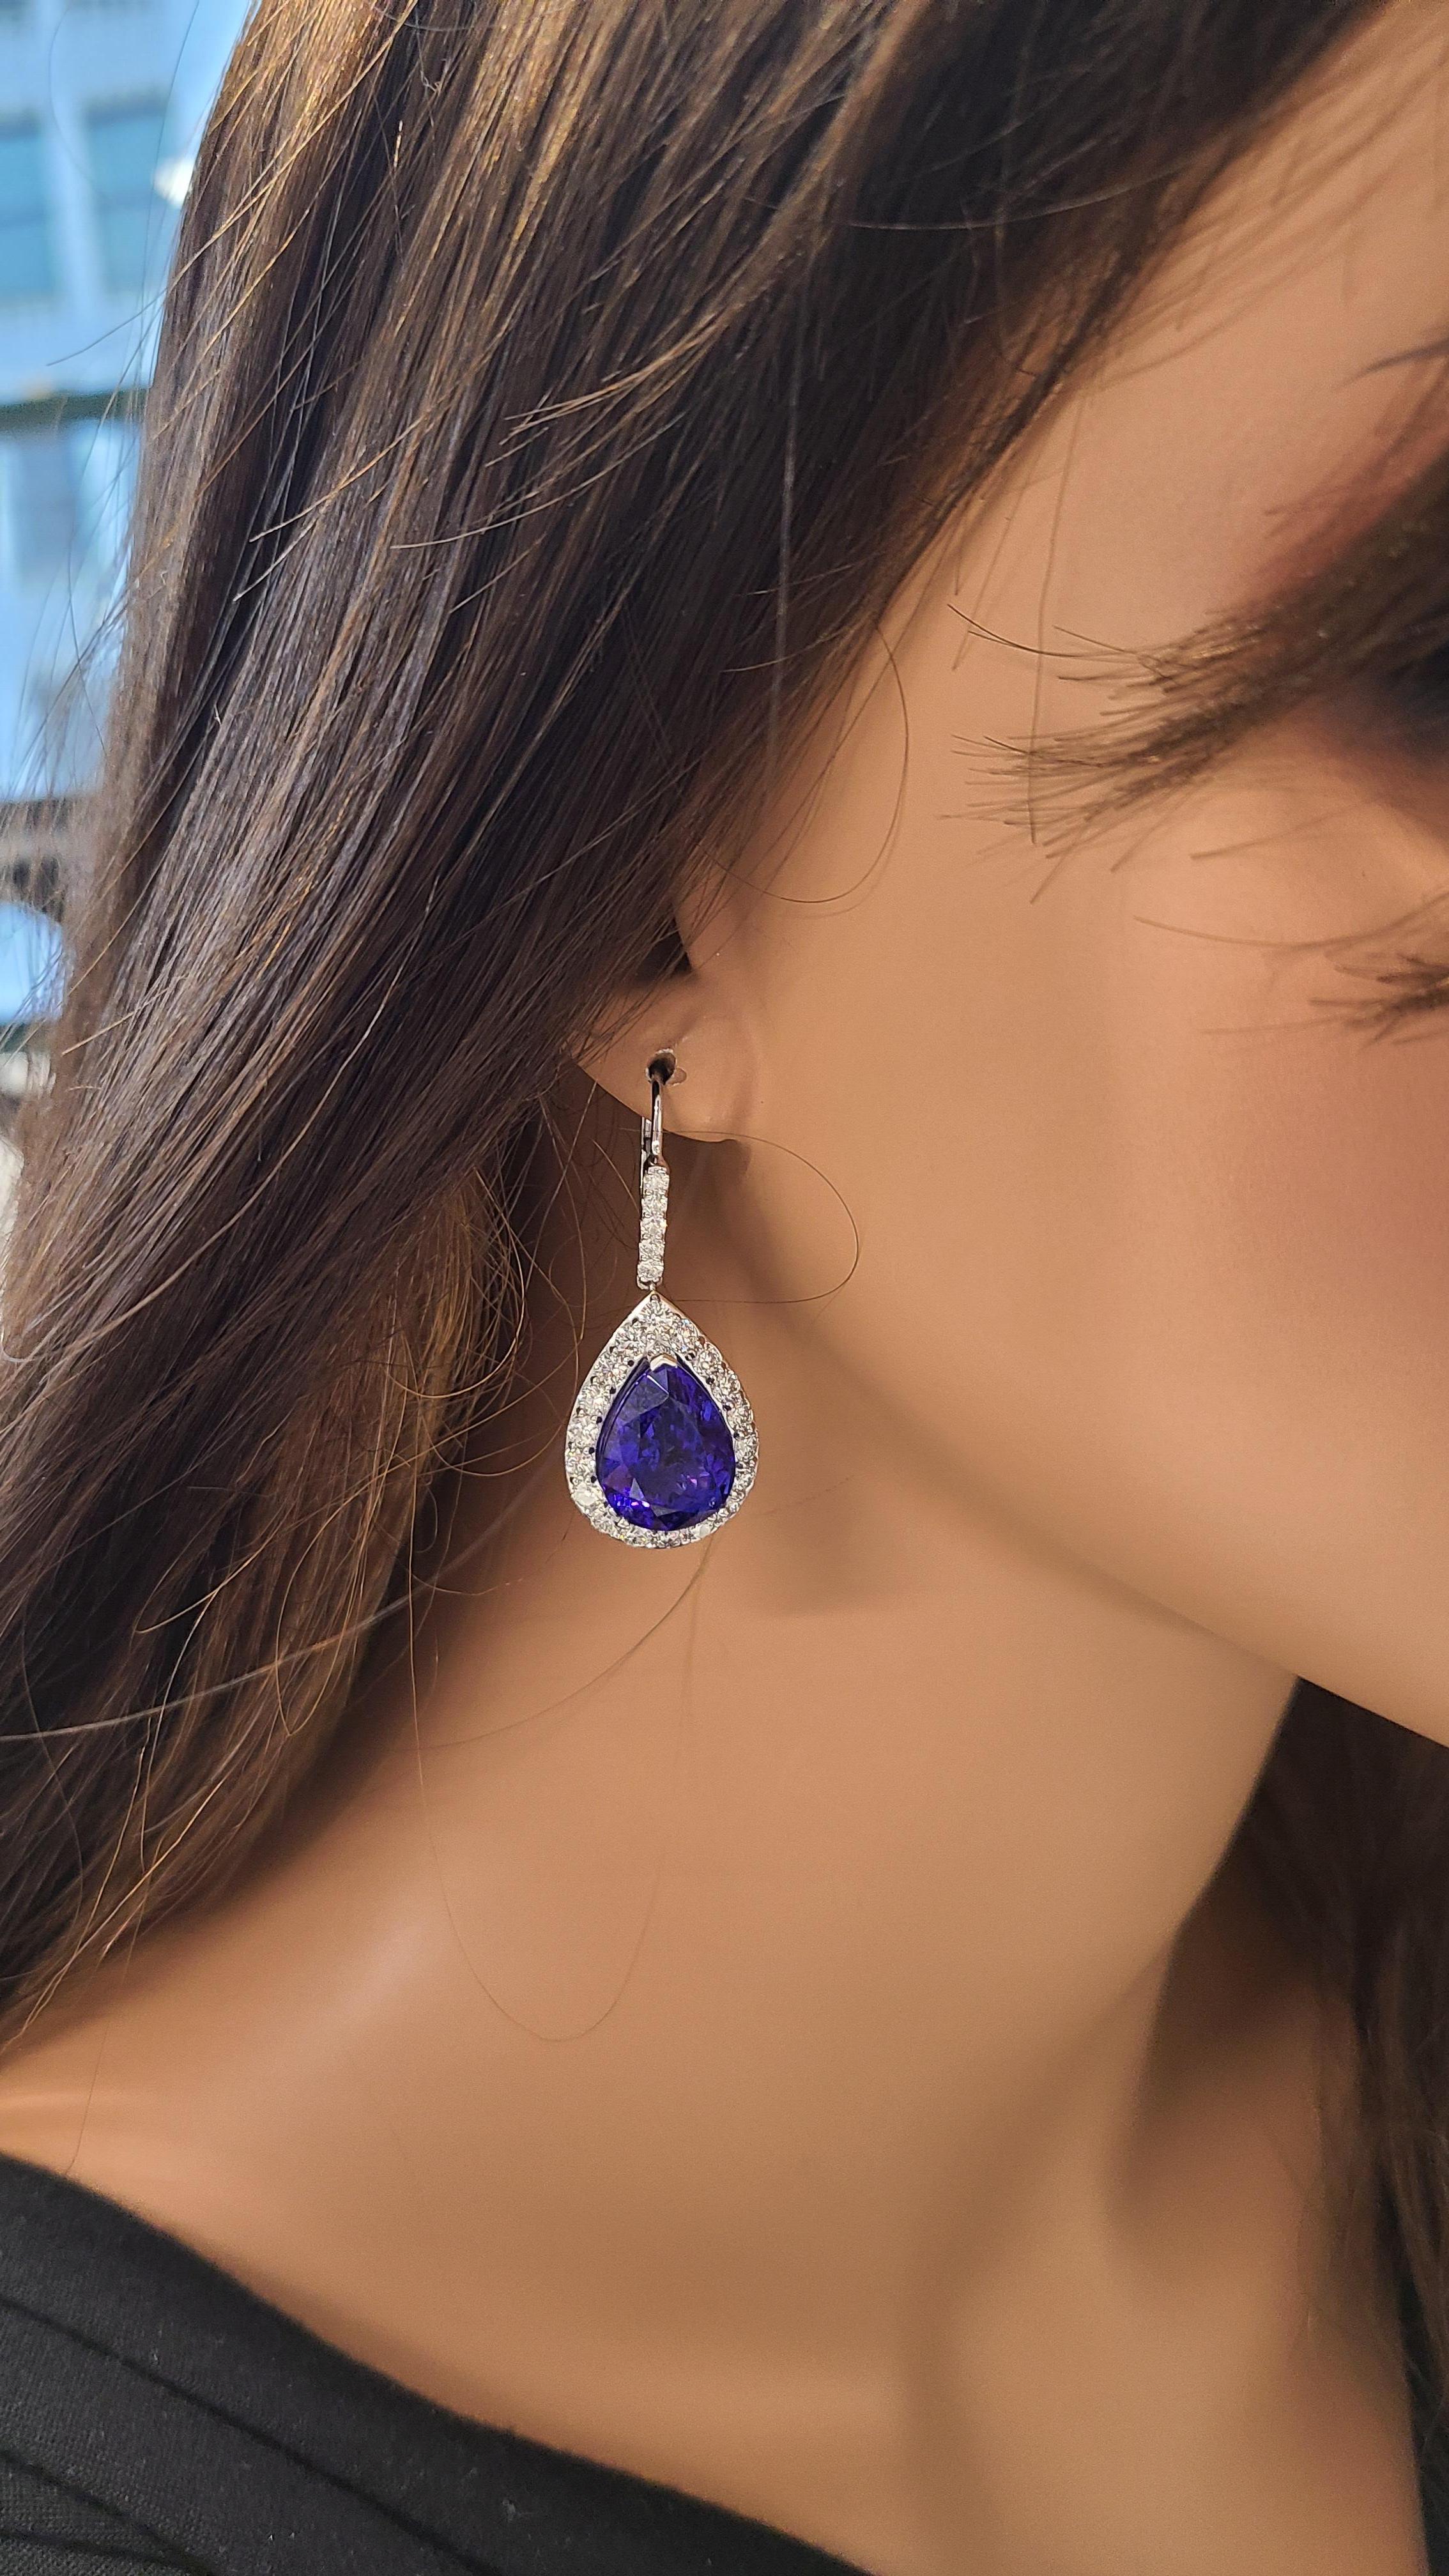 23 Carat Total Pear Shaped Tanzanite & Diamond Dangle Earrings in 18K White Gold In New Condition For Sale In Chicago, IL